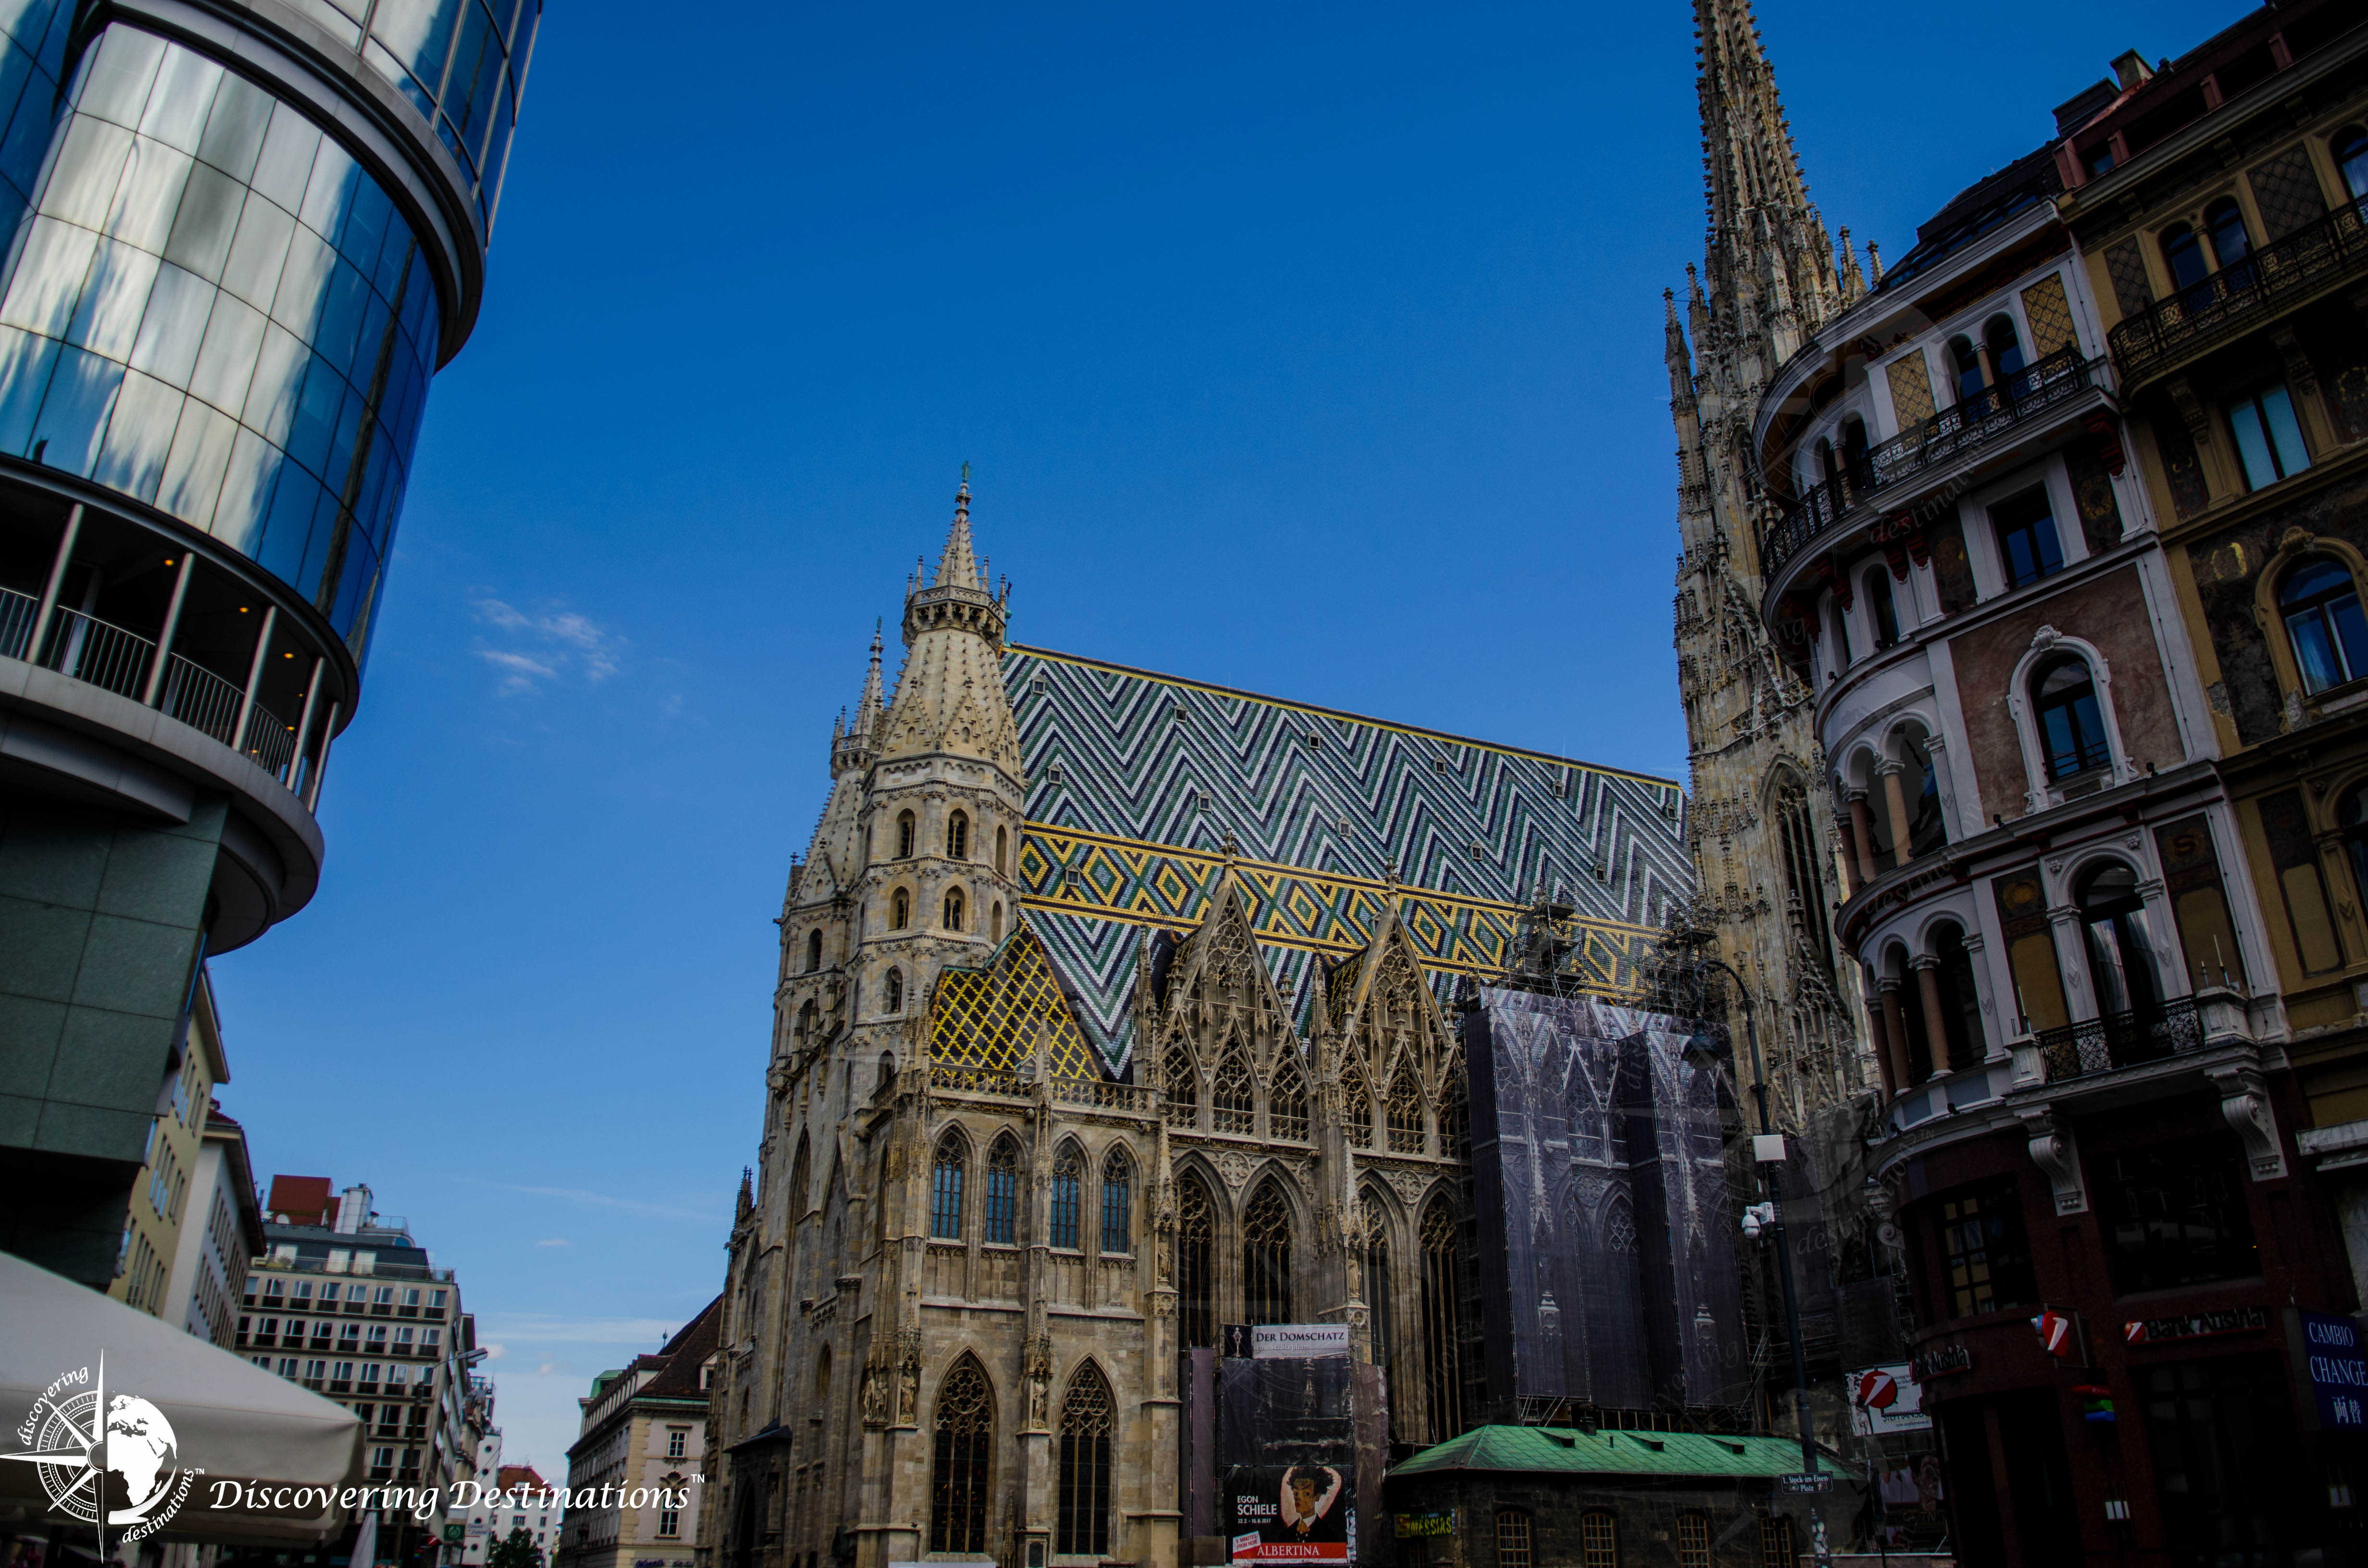 Discovering St Stephen's Cathedral